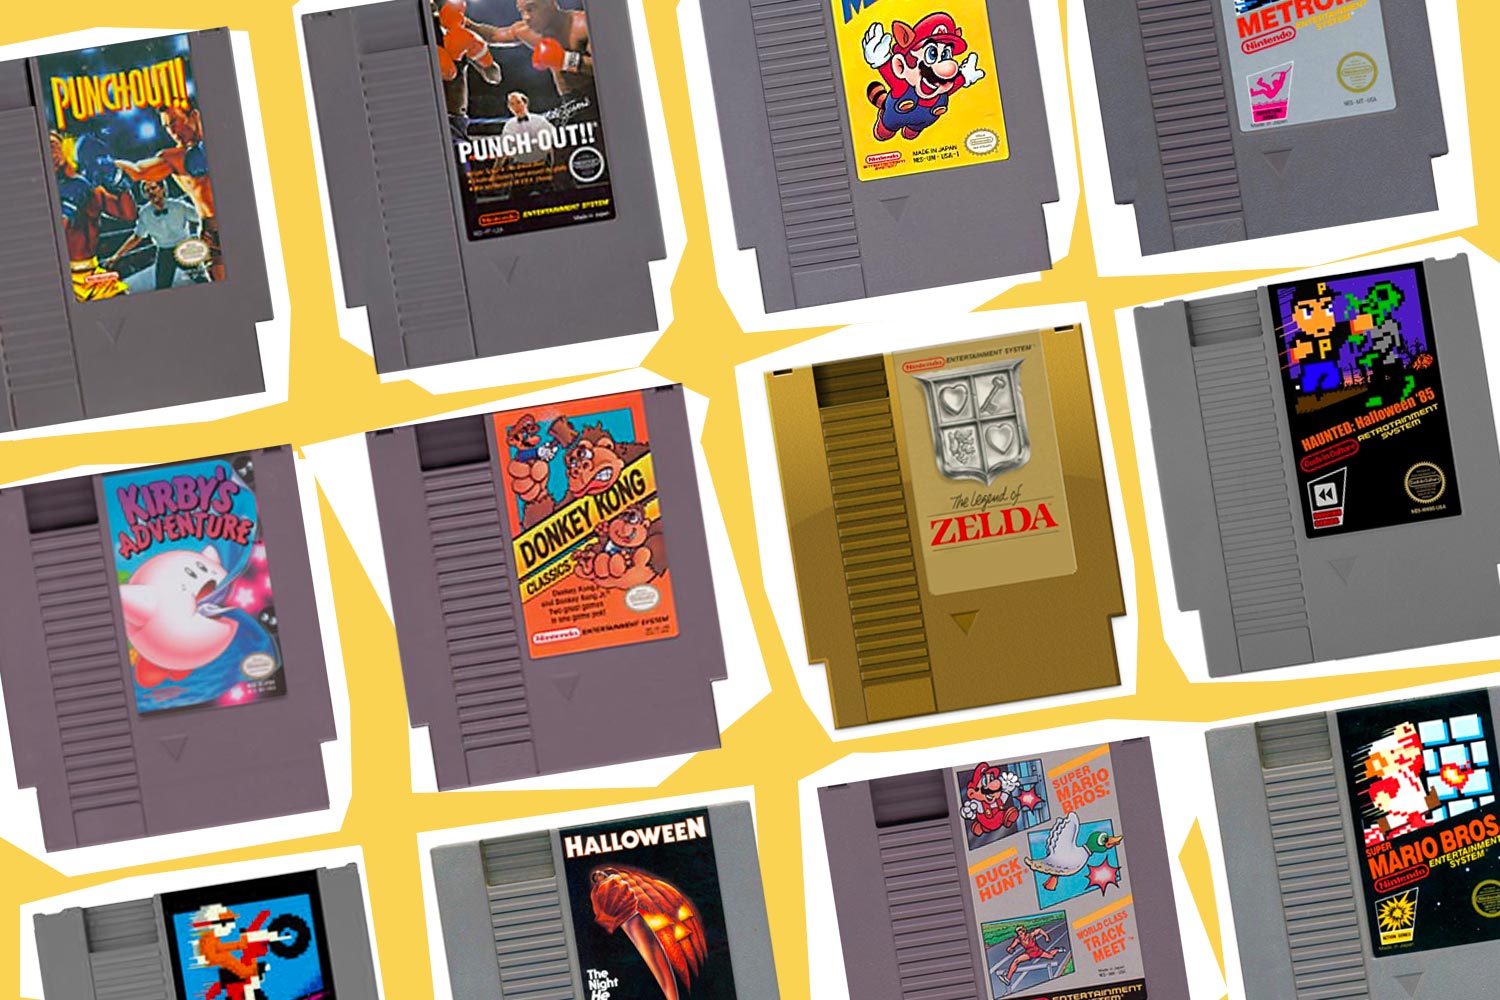 Covers of some of the NES games mentioned overlaid over NES systems.